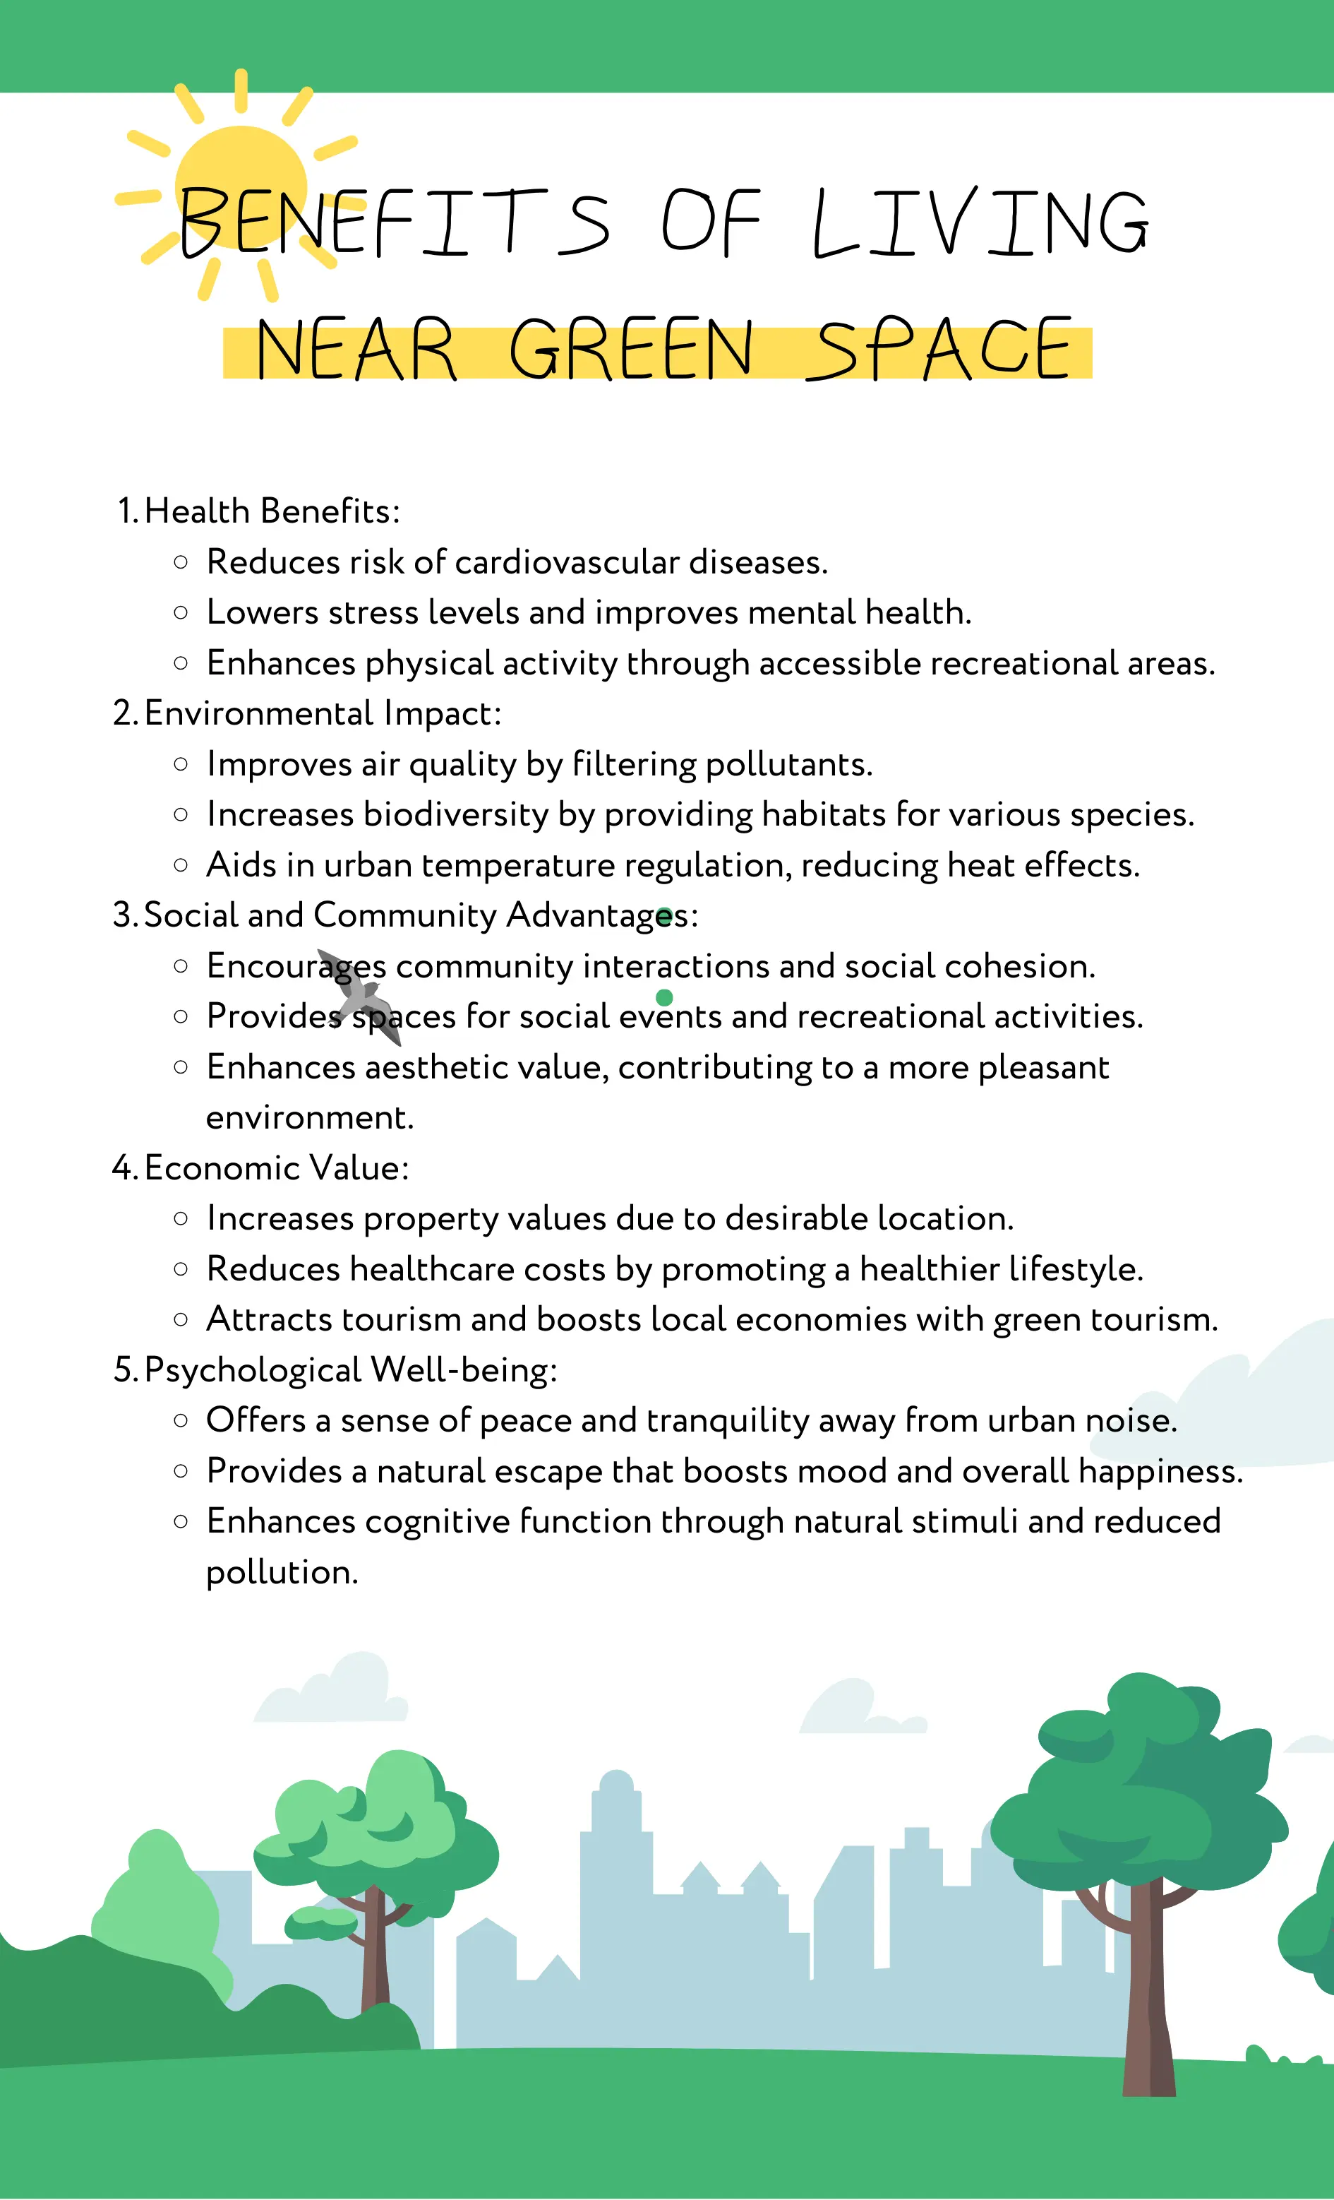 Infographic illustrating the benefits of Regina homes for sale backing green spaces. Highlights include health benefits such as reduced risk of cardiovascular diseases, improved mental health, and increased physical activity. Environmental impacts cover better air quality, increased biodiversity, and urban temperature control. Social advantages mention community interaction and aesthetic values, while economic impacts include higher property values and tourism boost. Psychological well-being benefits from tranquility, mood enhancement, and cognitive function improvement.